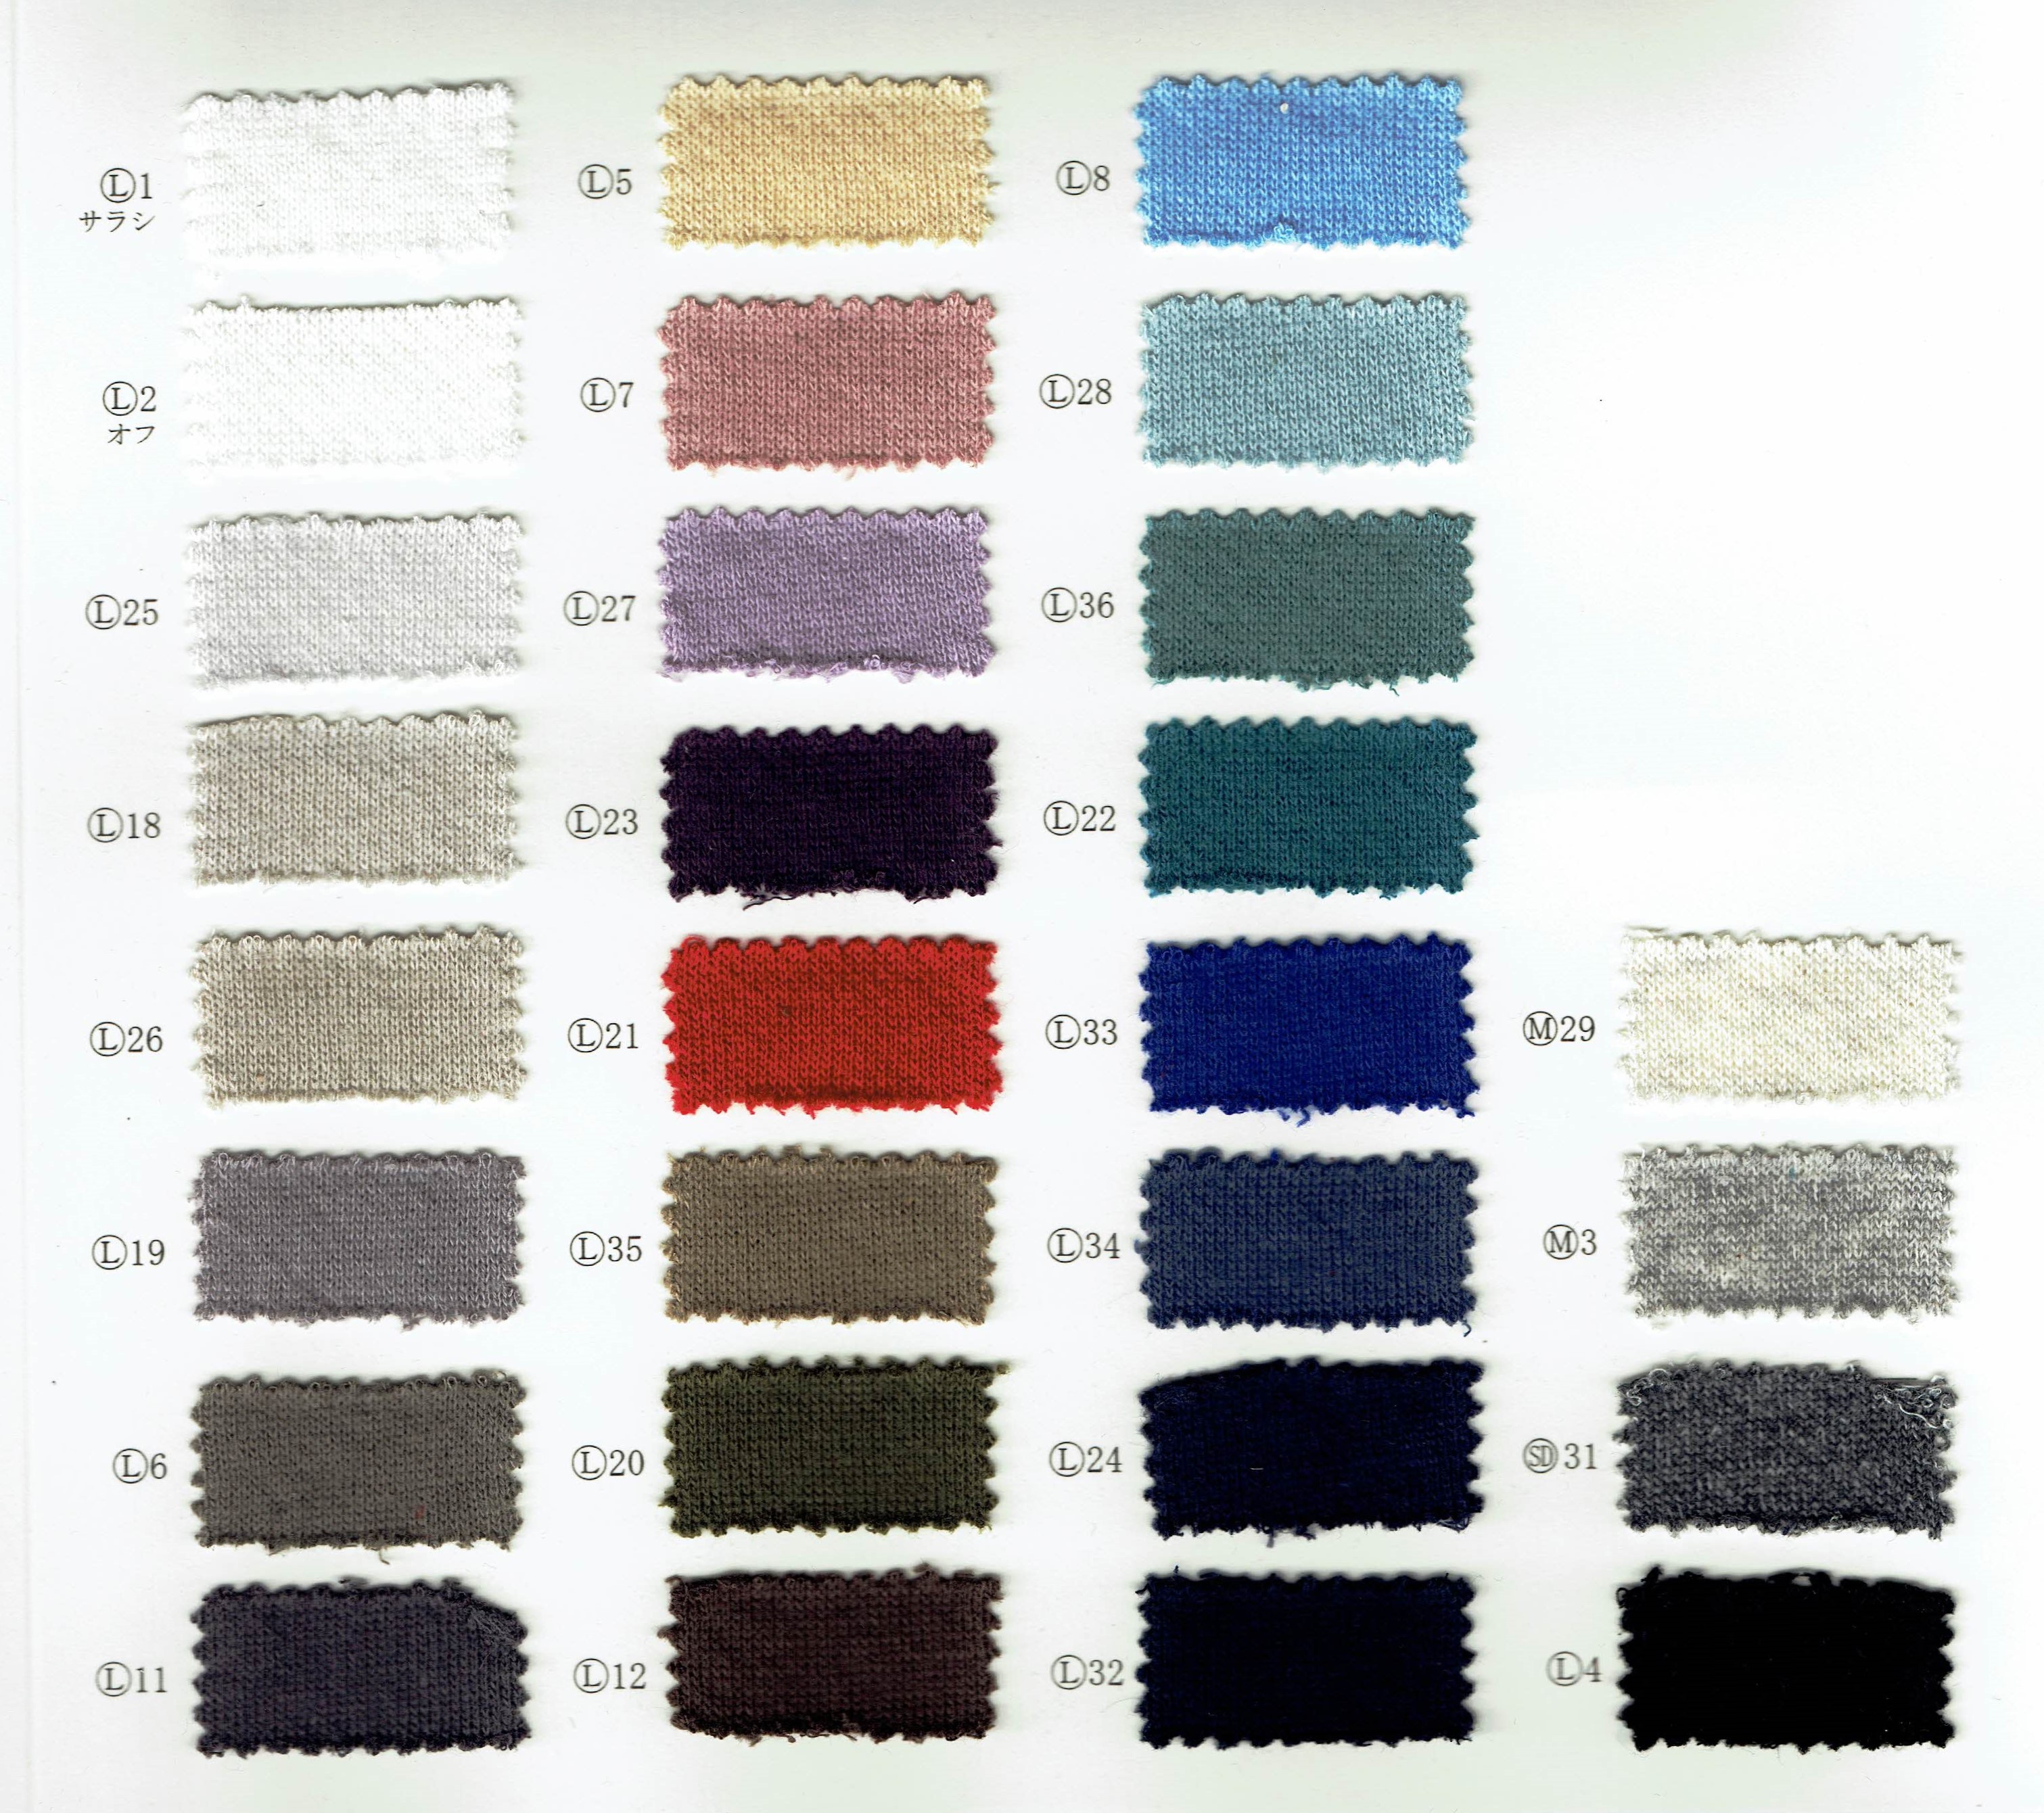 View COTTON100 DYED KNITTED FABRIC[FLEECY STITCH] DYED KNITTED FABRIC[FLEECY STITCH]